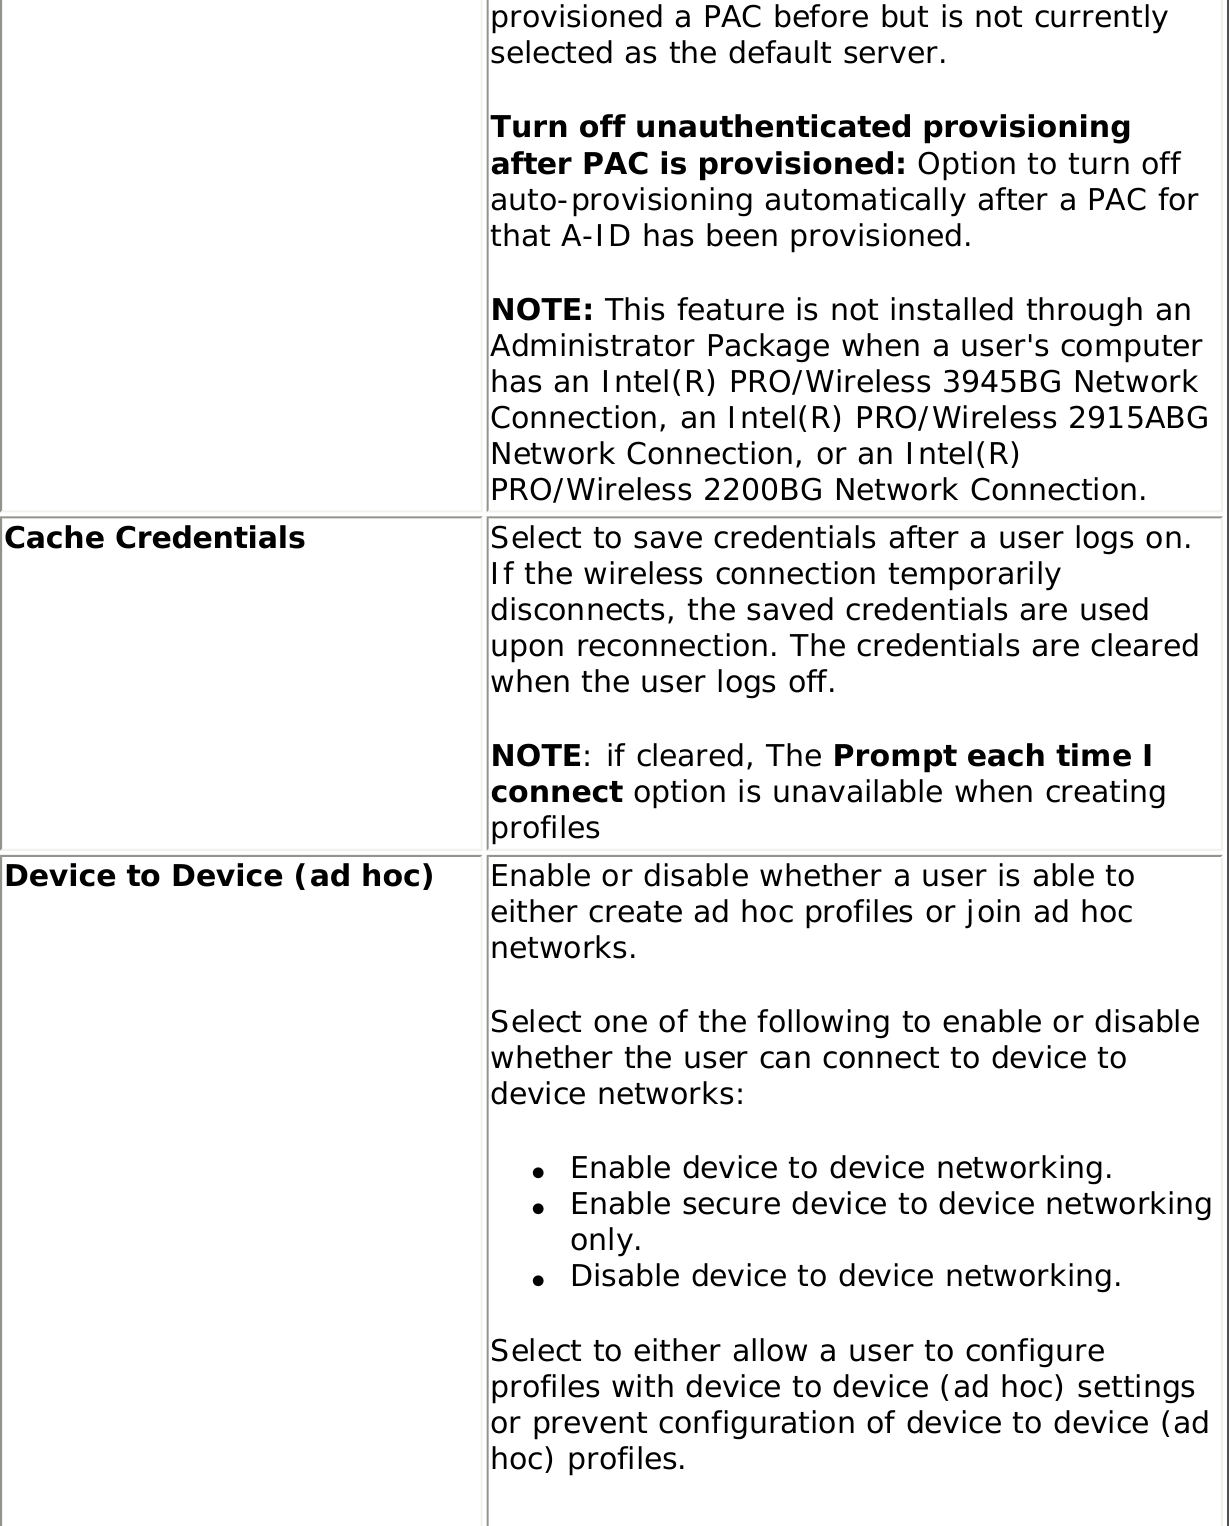 provisioned a PAC before but is not currently selected as the default server.Turn off unauthenticated provisioning after PAC is provisioned: Option to turn off auto-provisioning automatically after a PAC for that A-ID has been provisioned. NOTE: This feature is not installed through an Administrator Package when a user&apos;s computer has an Intel(R) PRO/Wireless 3945BG Network Connection, an Intel(R) PRO/Wireless 2915ABG Network Connection, or an Intel(R) PRO/Wireless 2200BG Network Connection.Cache Credentials Select to save credentials after a user logs on. If the wireless connection temporarily disconnects, the saved credentials are used upon reconnection. The credentials are cleared when the user logs off. NOTE: if cleared, The Prompt each time I connect option is unavailable when creating profiles Device to Device (ad hoc)  Enable or disable whether a user is able to either create ad hoc profiles or join ad hoc networks. Select one of the following to enable or disable whether the user can connect to device to device networks: ●     Enable device to device networking. ●     Enable secure device to device networking only. ●     Disable device to device networking. Select to either allow a user to configure profiles with device to device (ad hoc) settings or prevent configuration of device to device (ad hoc) profiles. 